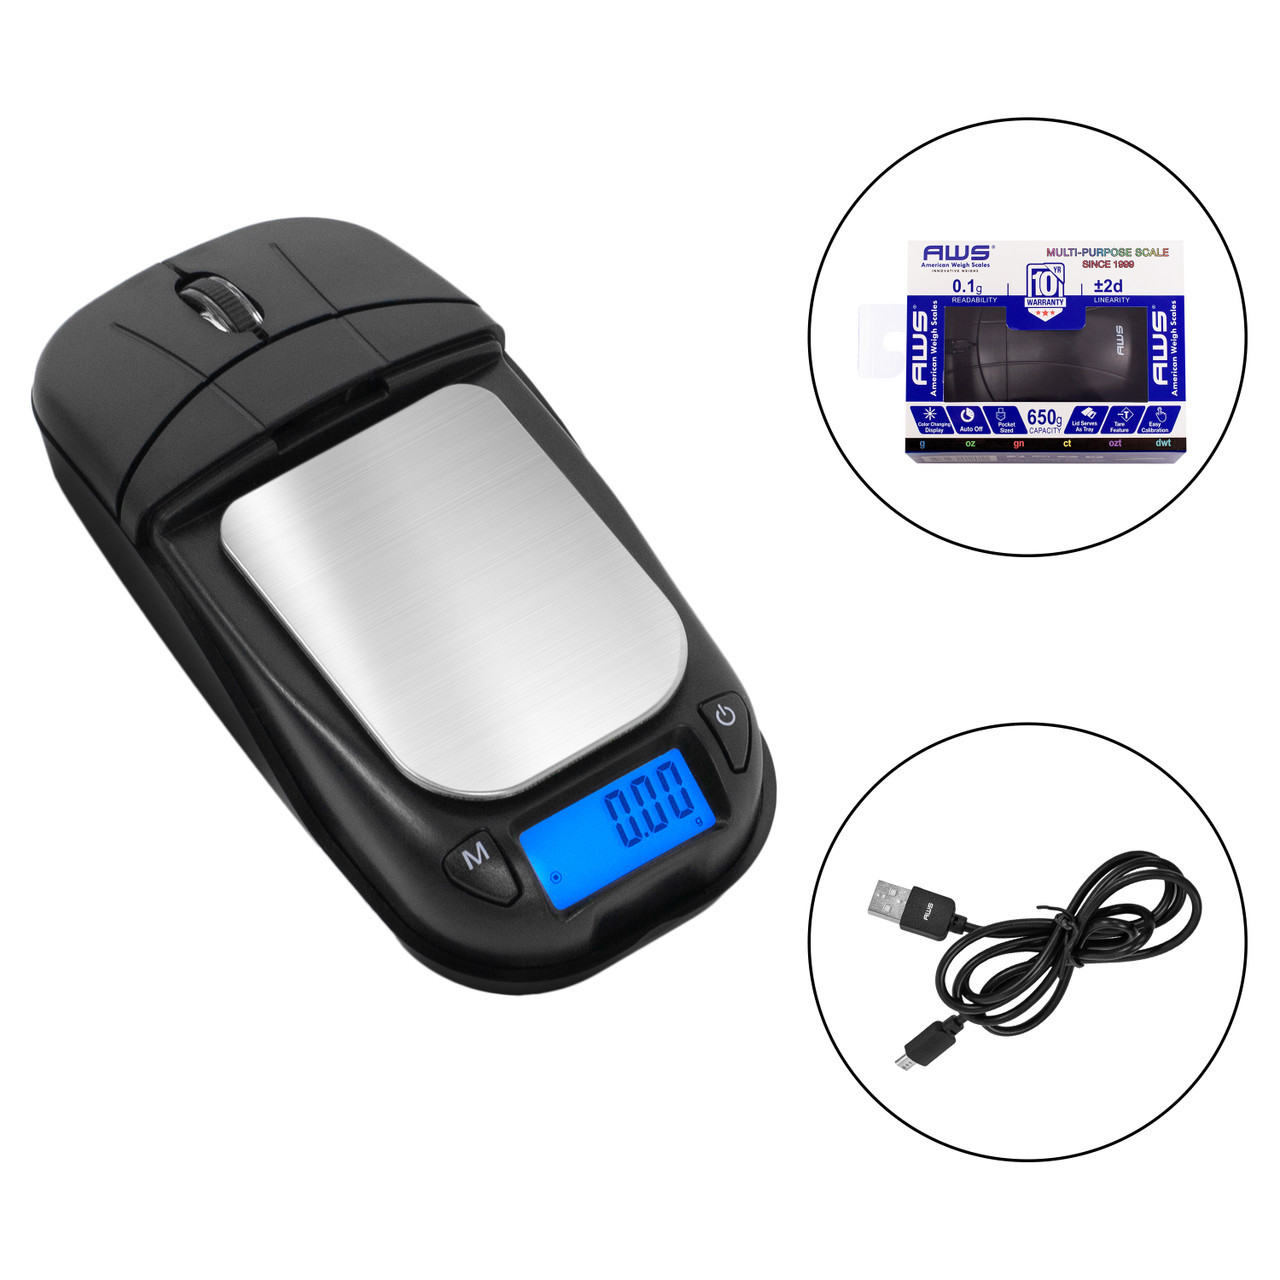 American Weigh Scales MSC-650 (Mouse Scale) Digital Pocket Scale